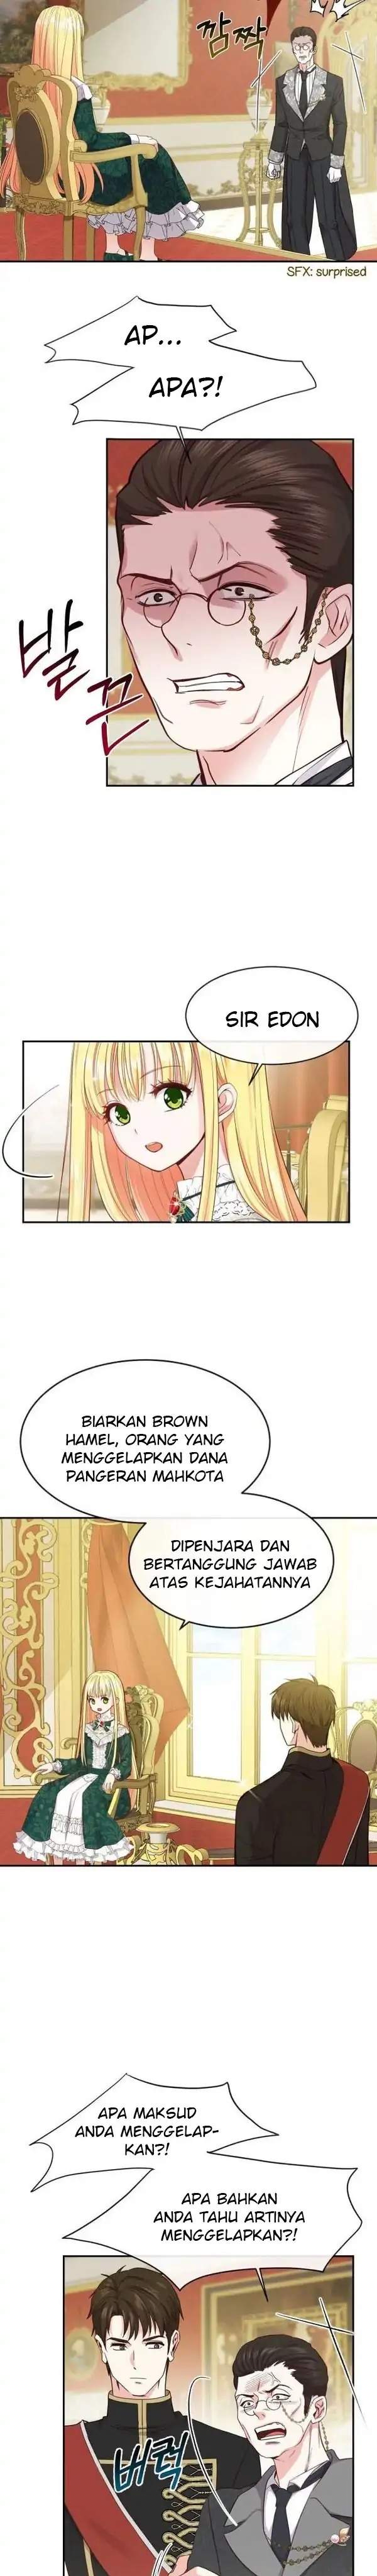 I Became the Wife of the Monstrous Crown Prince Chapter 04